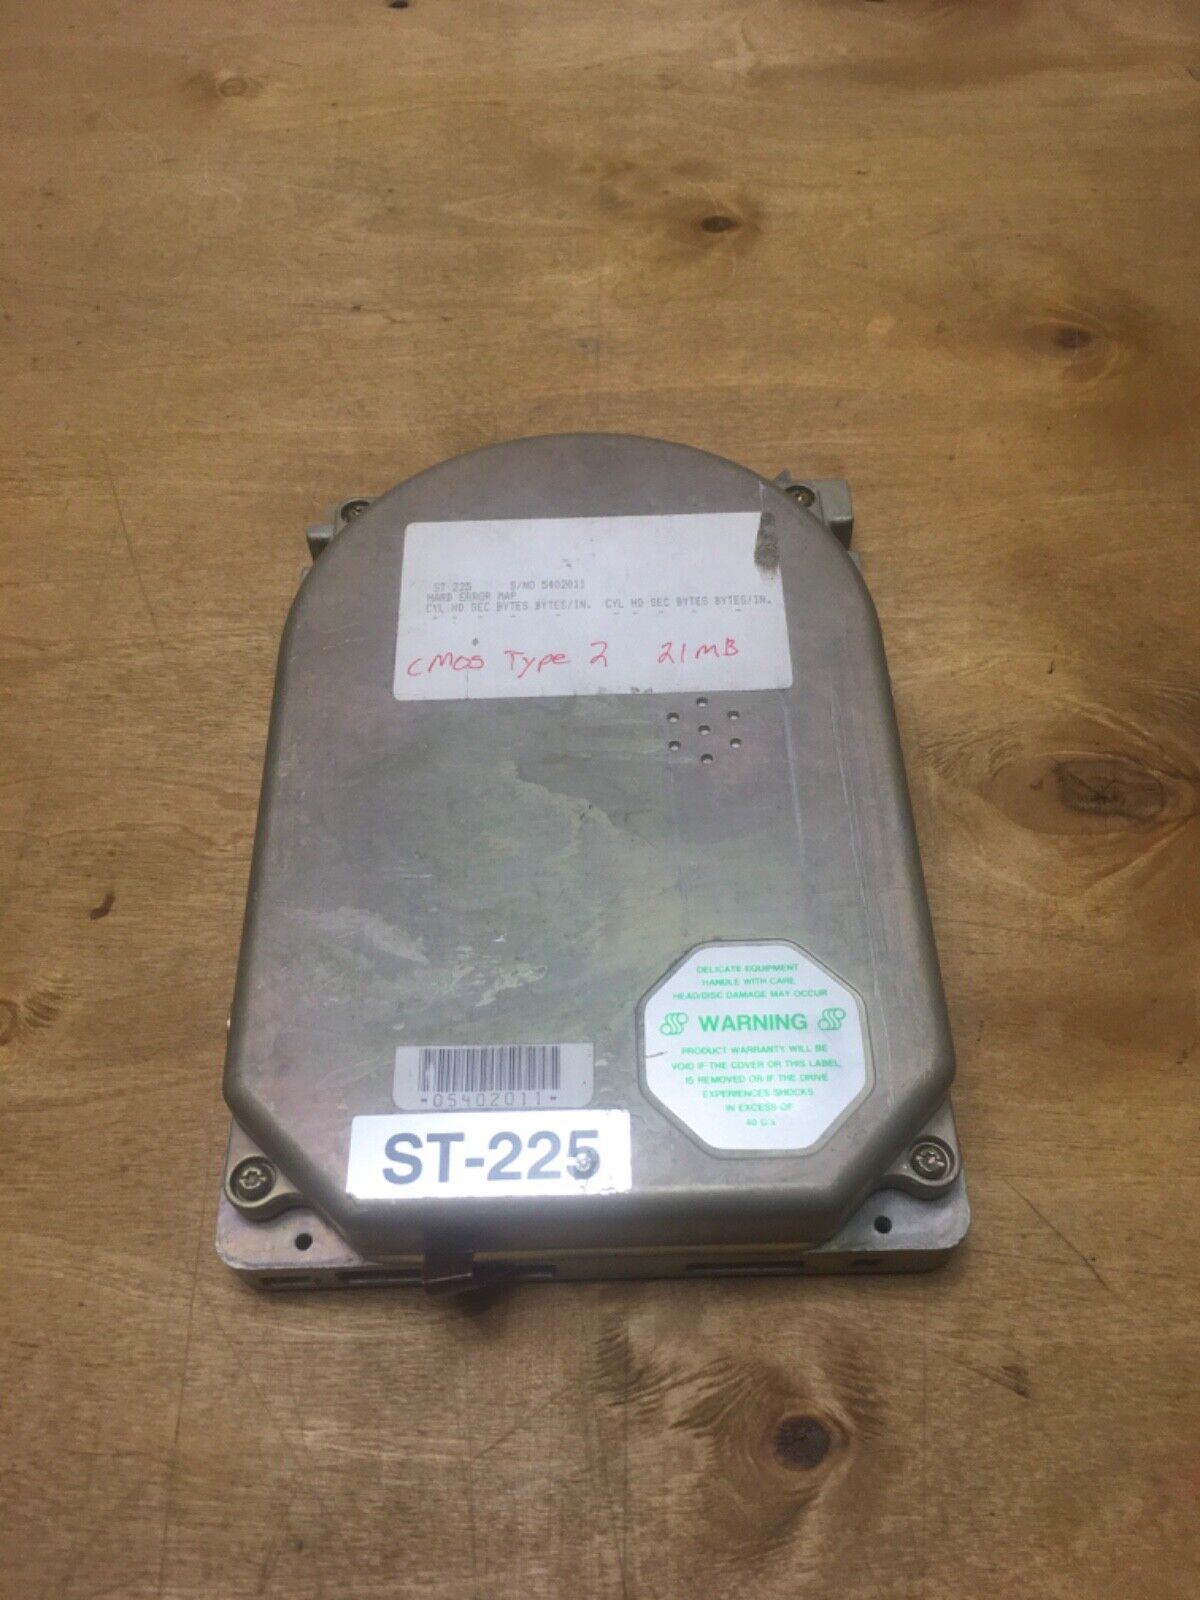 Seagate ST-225R 20MB 5.25